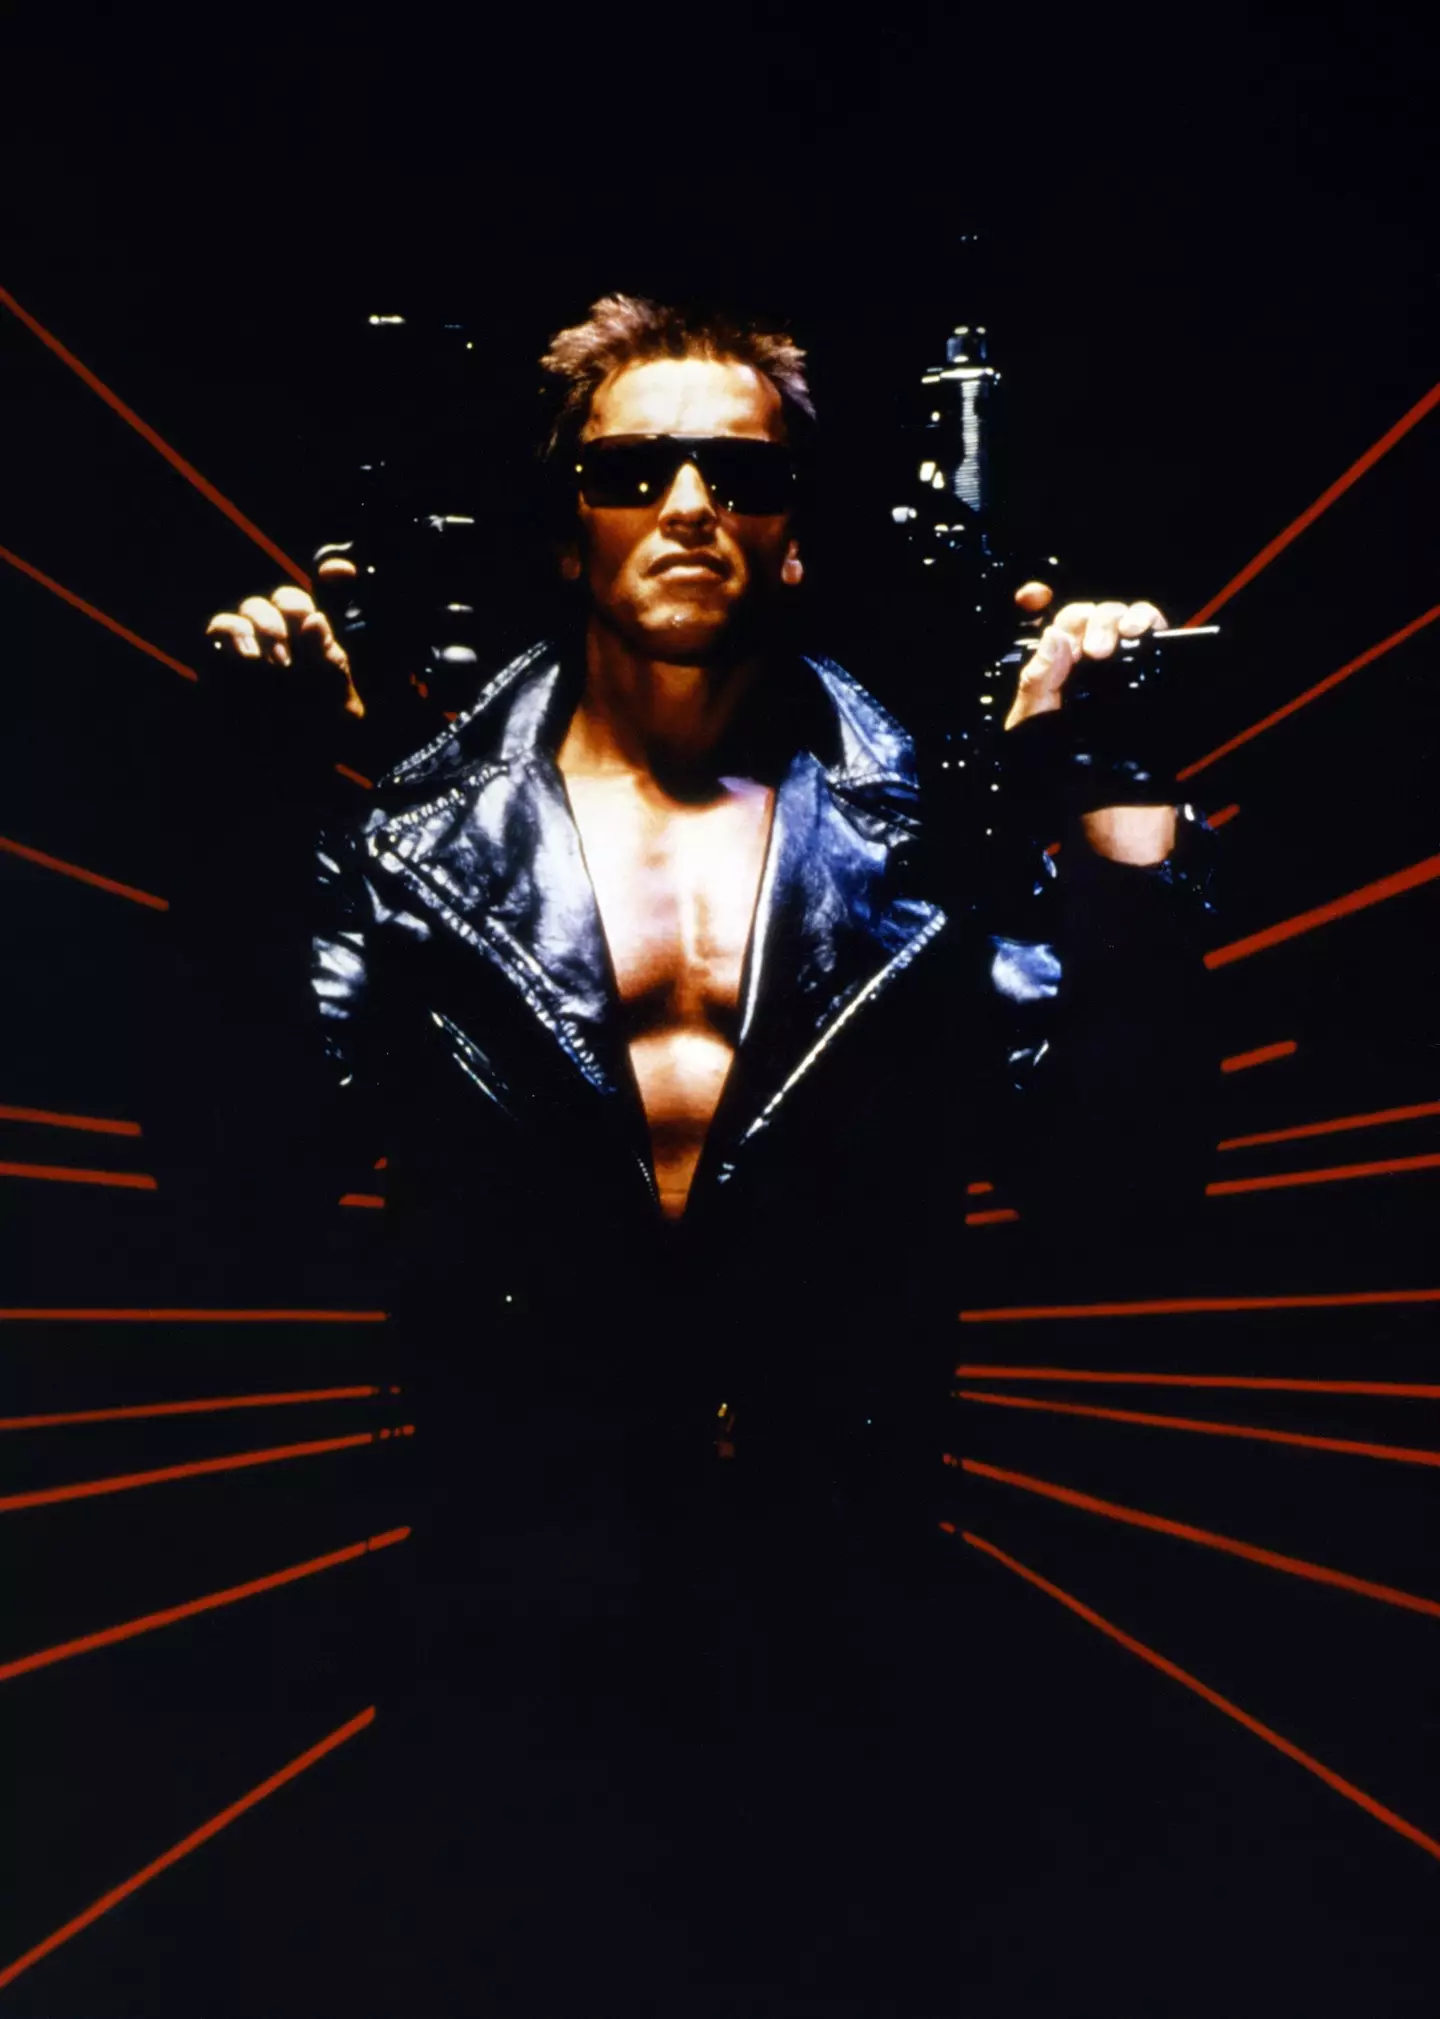 Arnold Schwarzenegger said that whoever played the role needed to 'be a machine'.